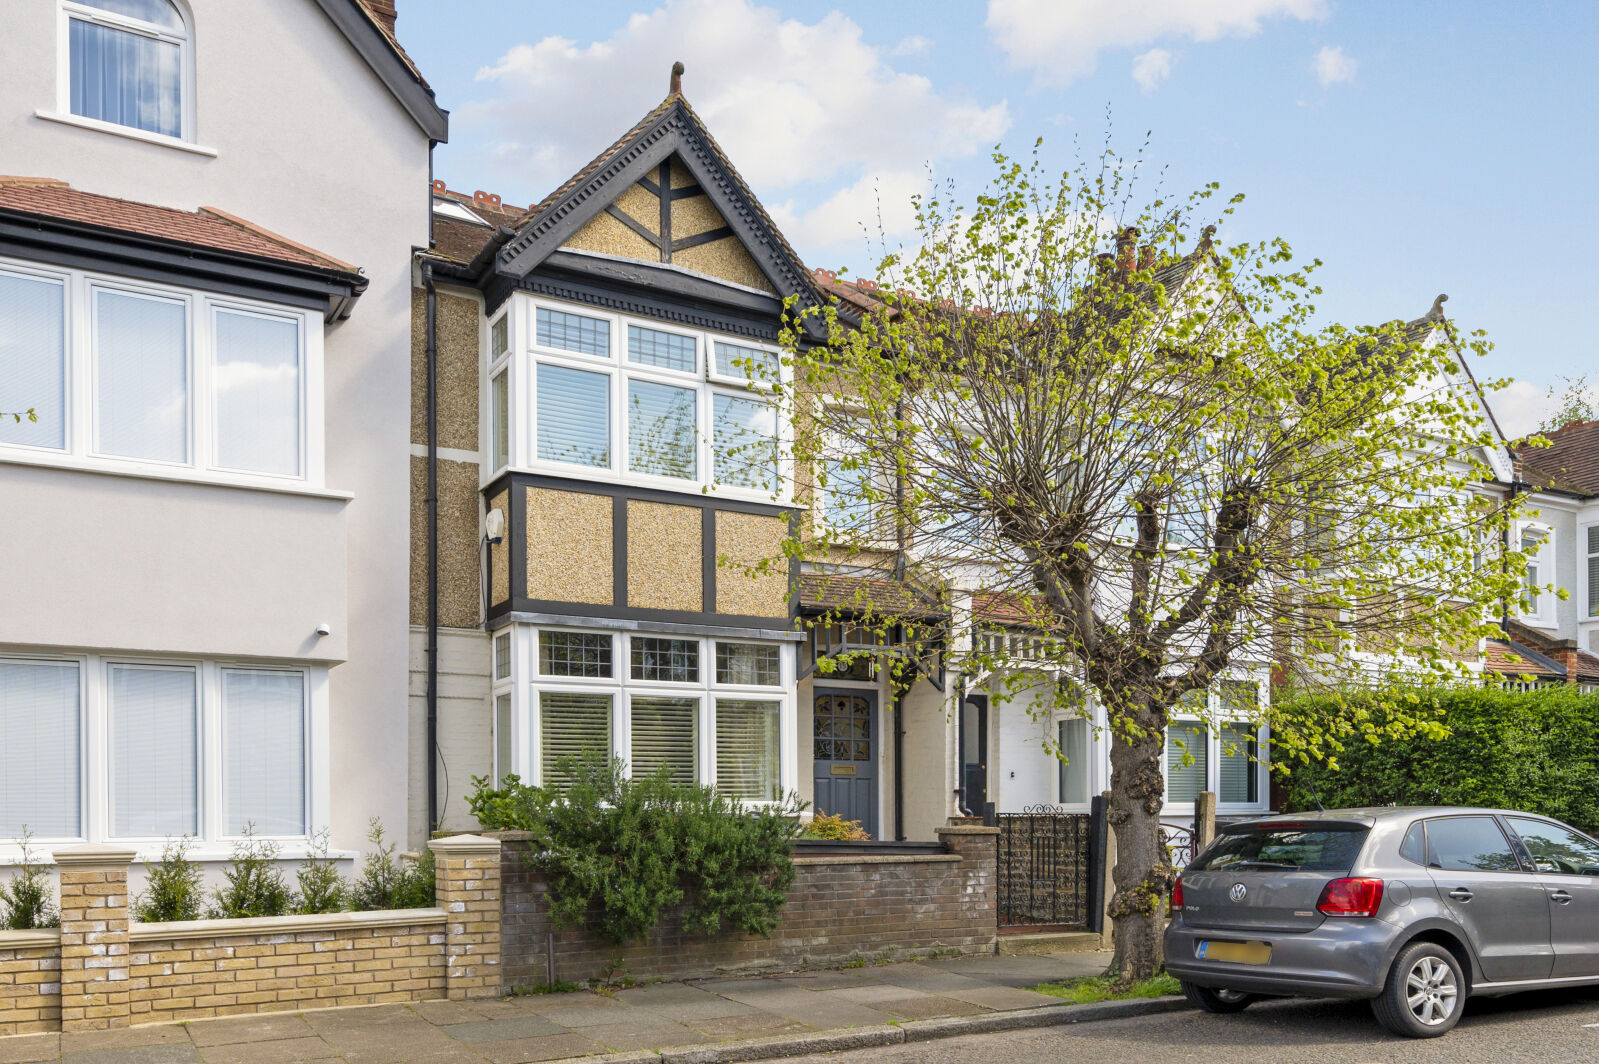 4 bedroom mid terraced house for sale Cannon Hill Lane, Wimbledon, SW20, main image